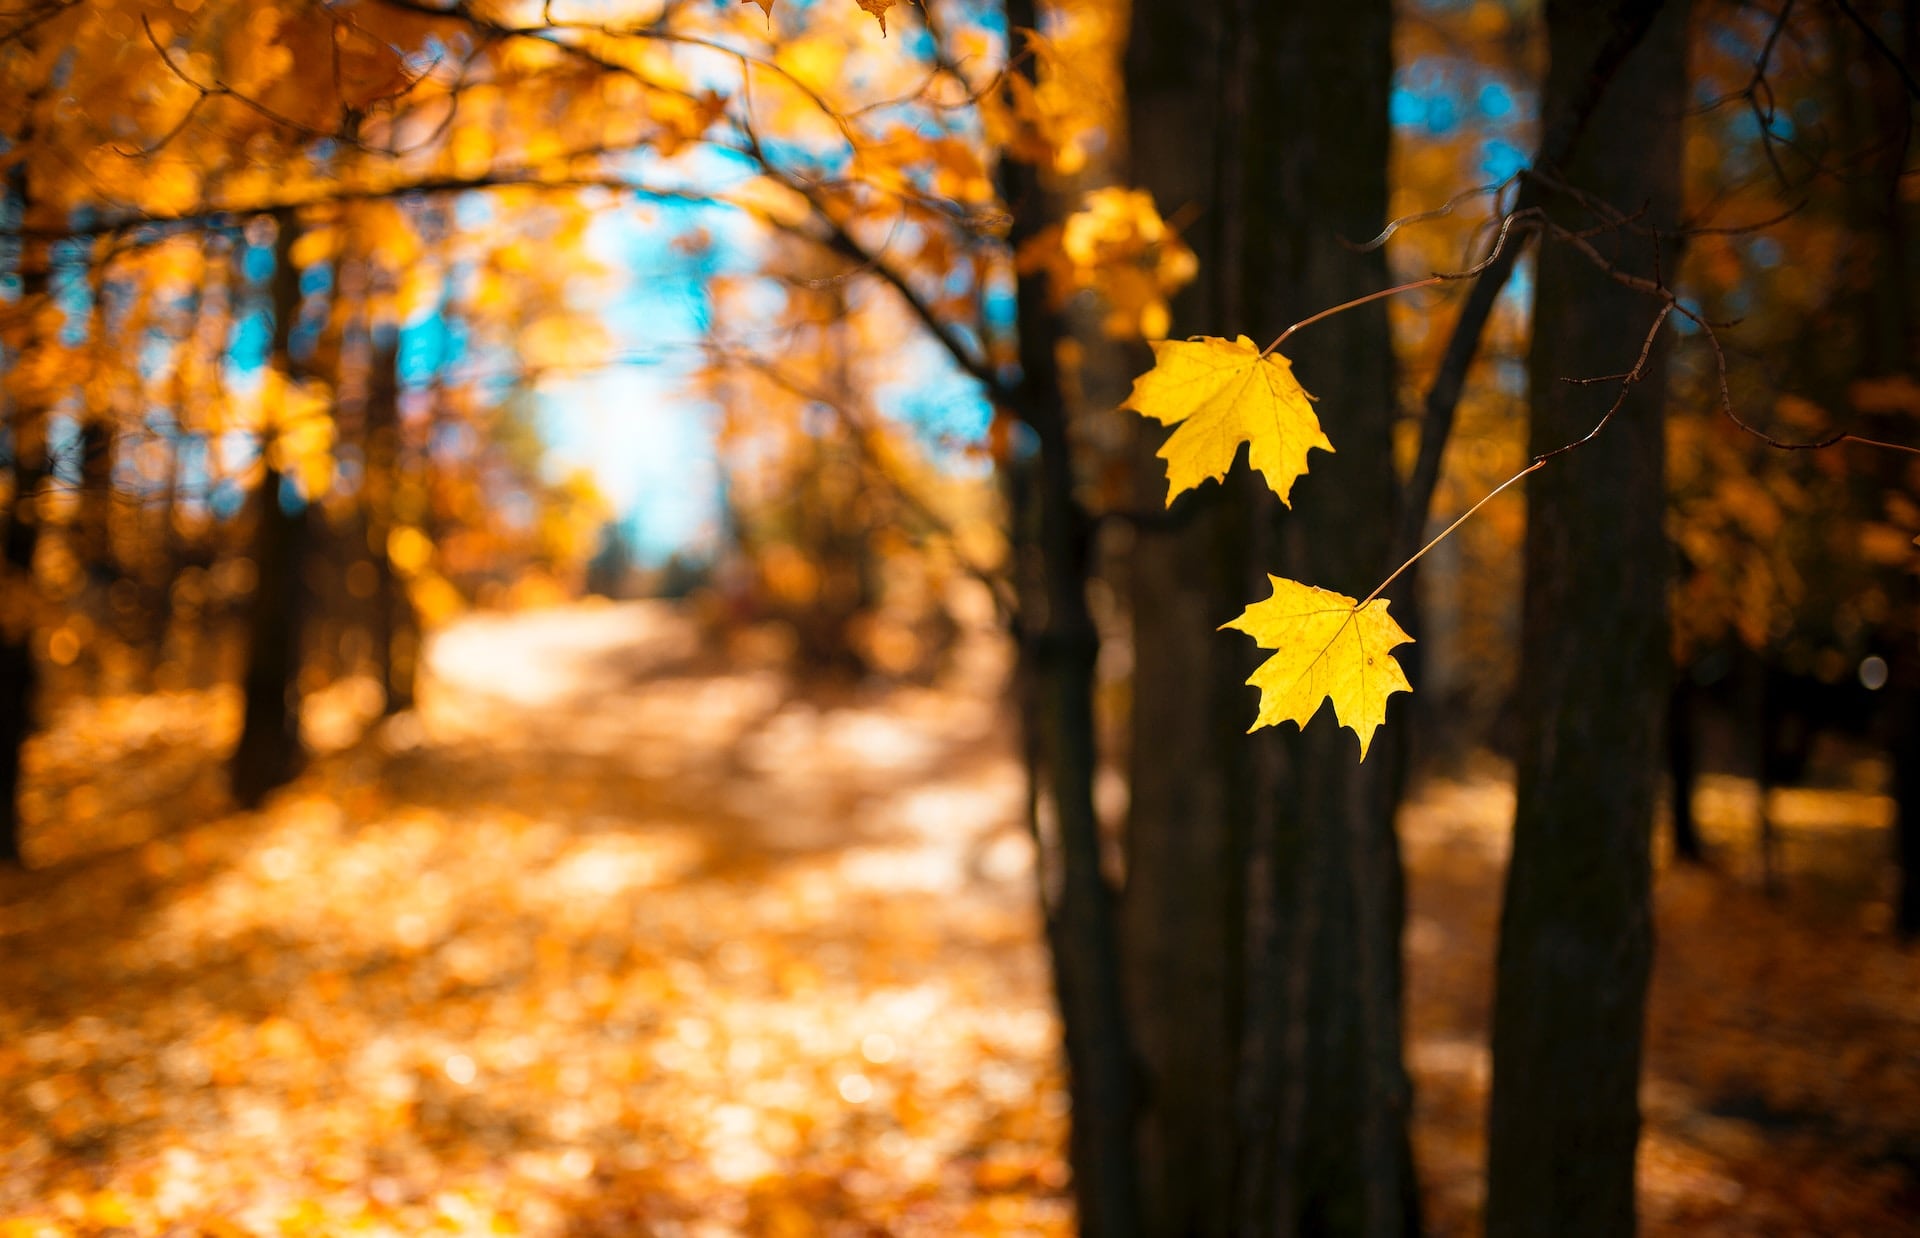 A yellow leaf hangs from a tree in a forest.